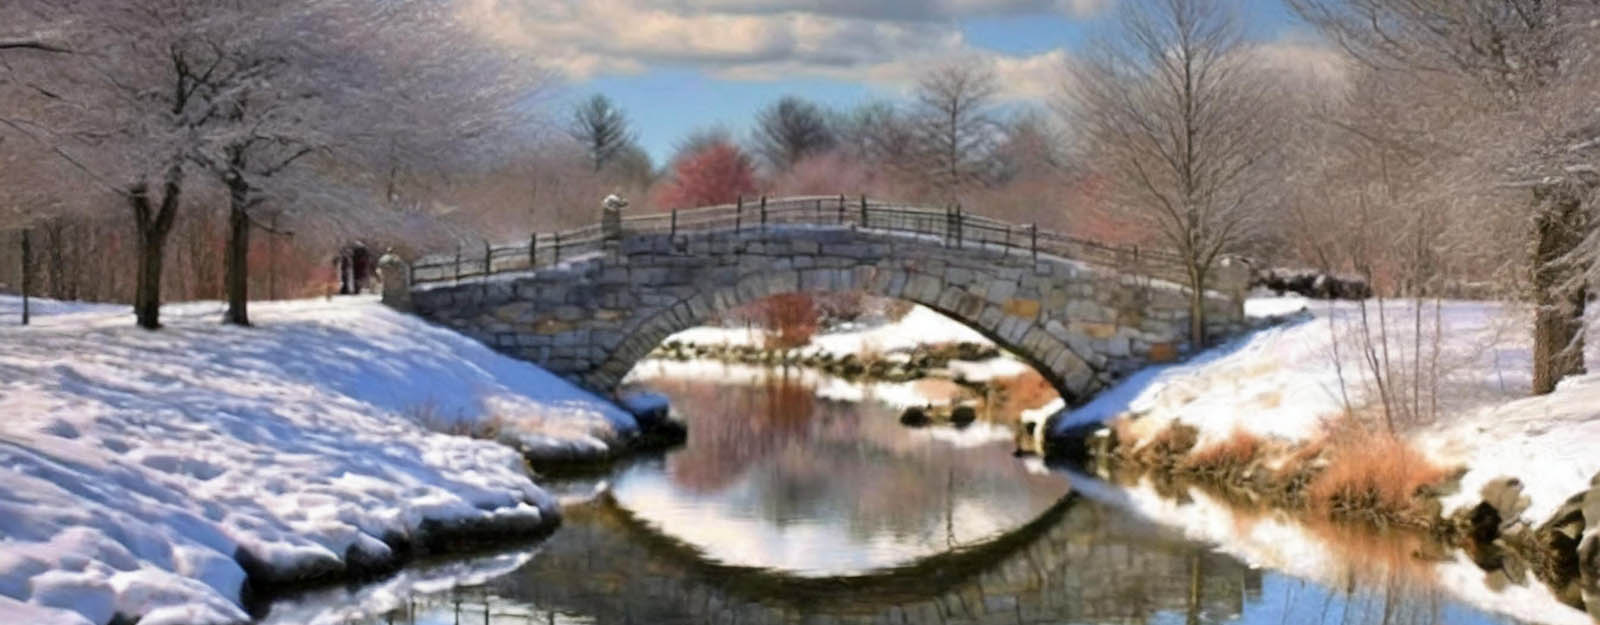 Computer generated image of a stone arch bridge spanning a creek along snow covered woods.